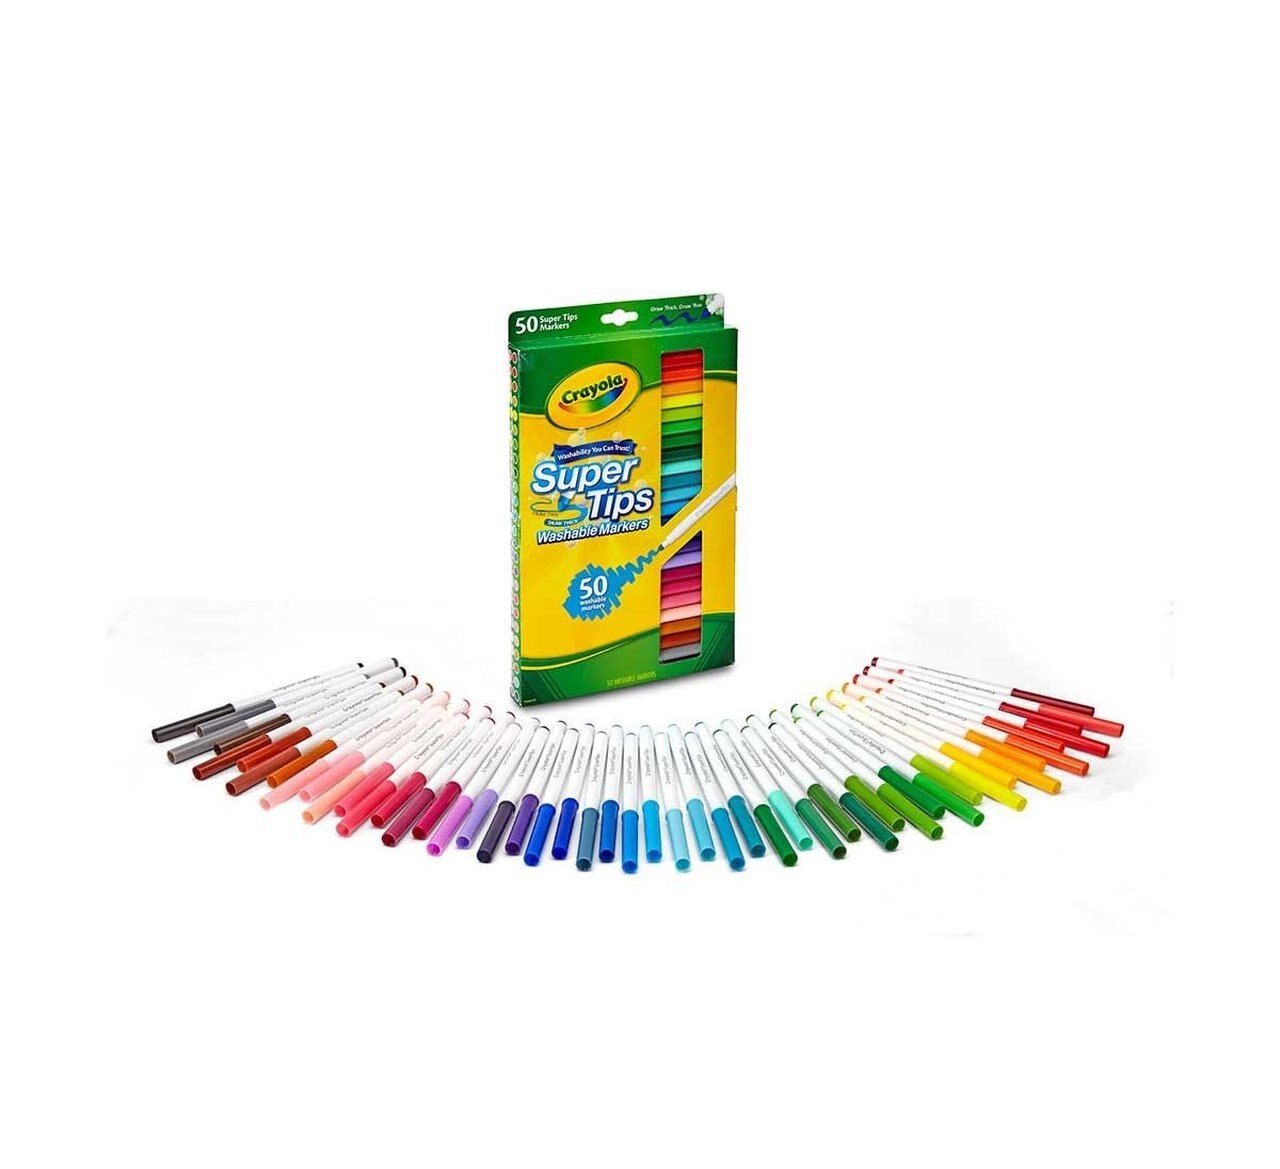 Crayola Super Tips Washable Markers 50ct Price in Pakistan